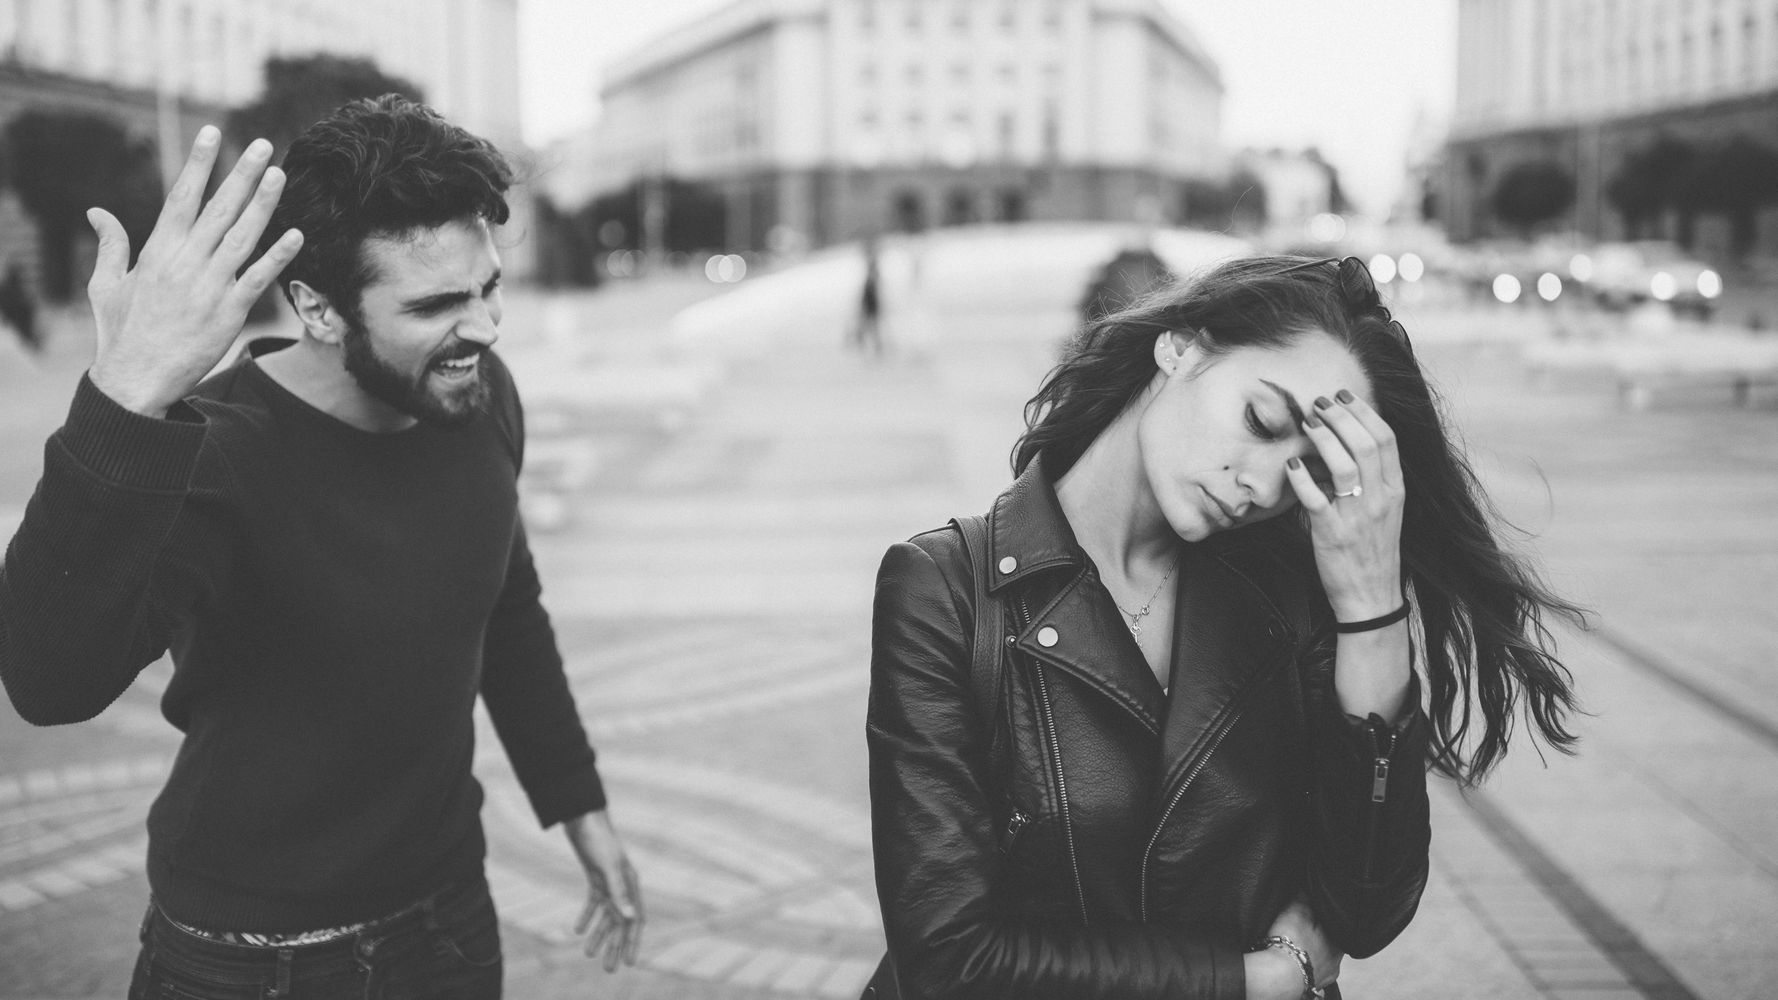 What are the 5 signs of emotional abuse?